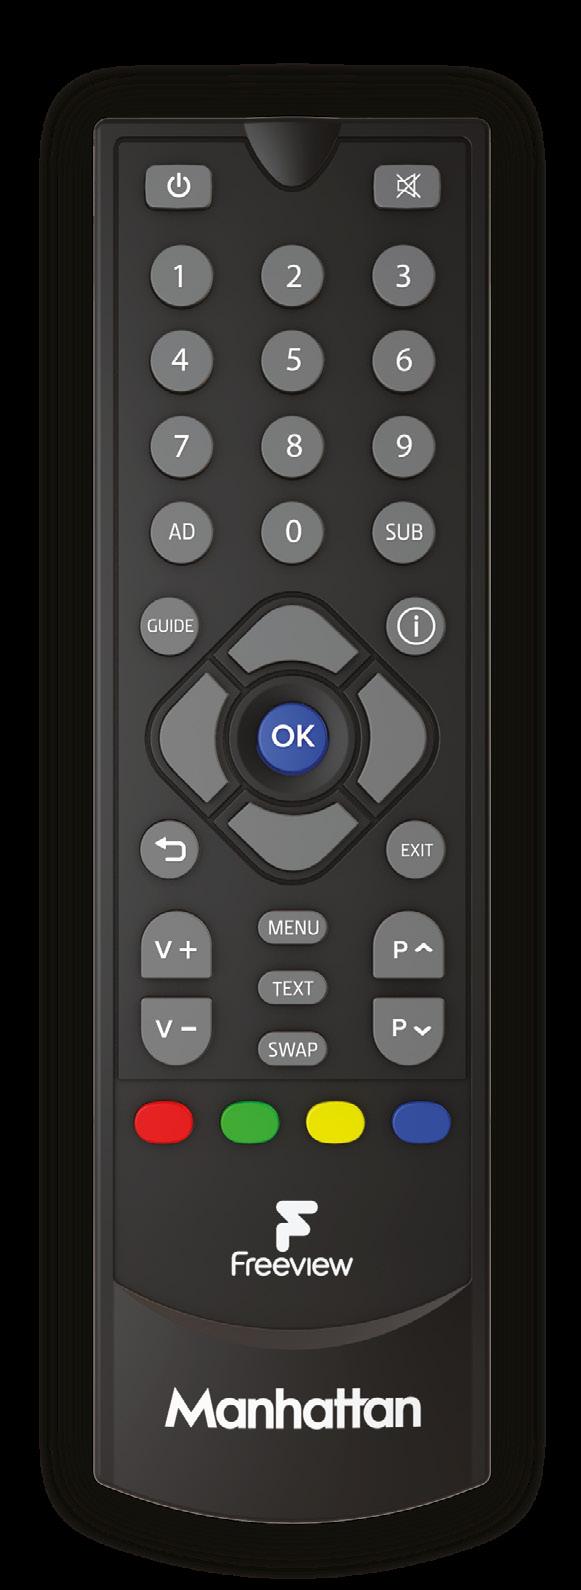 YOUR REMOTE Standby on/off Navigate menus Volume up/down Mute Display Now & Next when watching TV Select options & perform on-screen